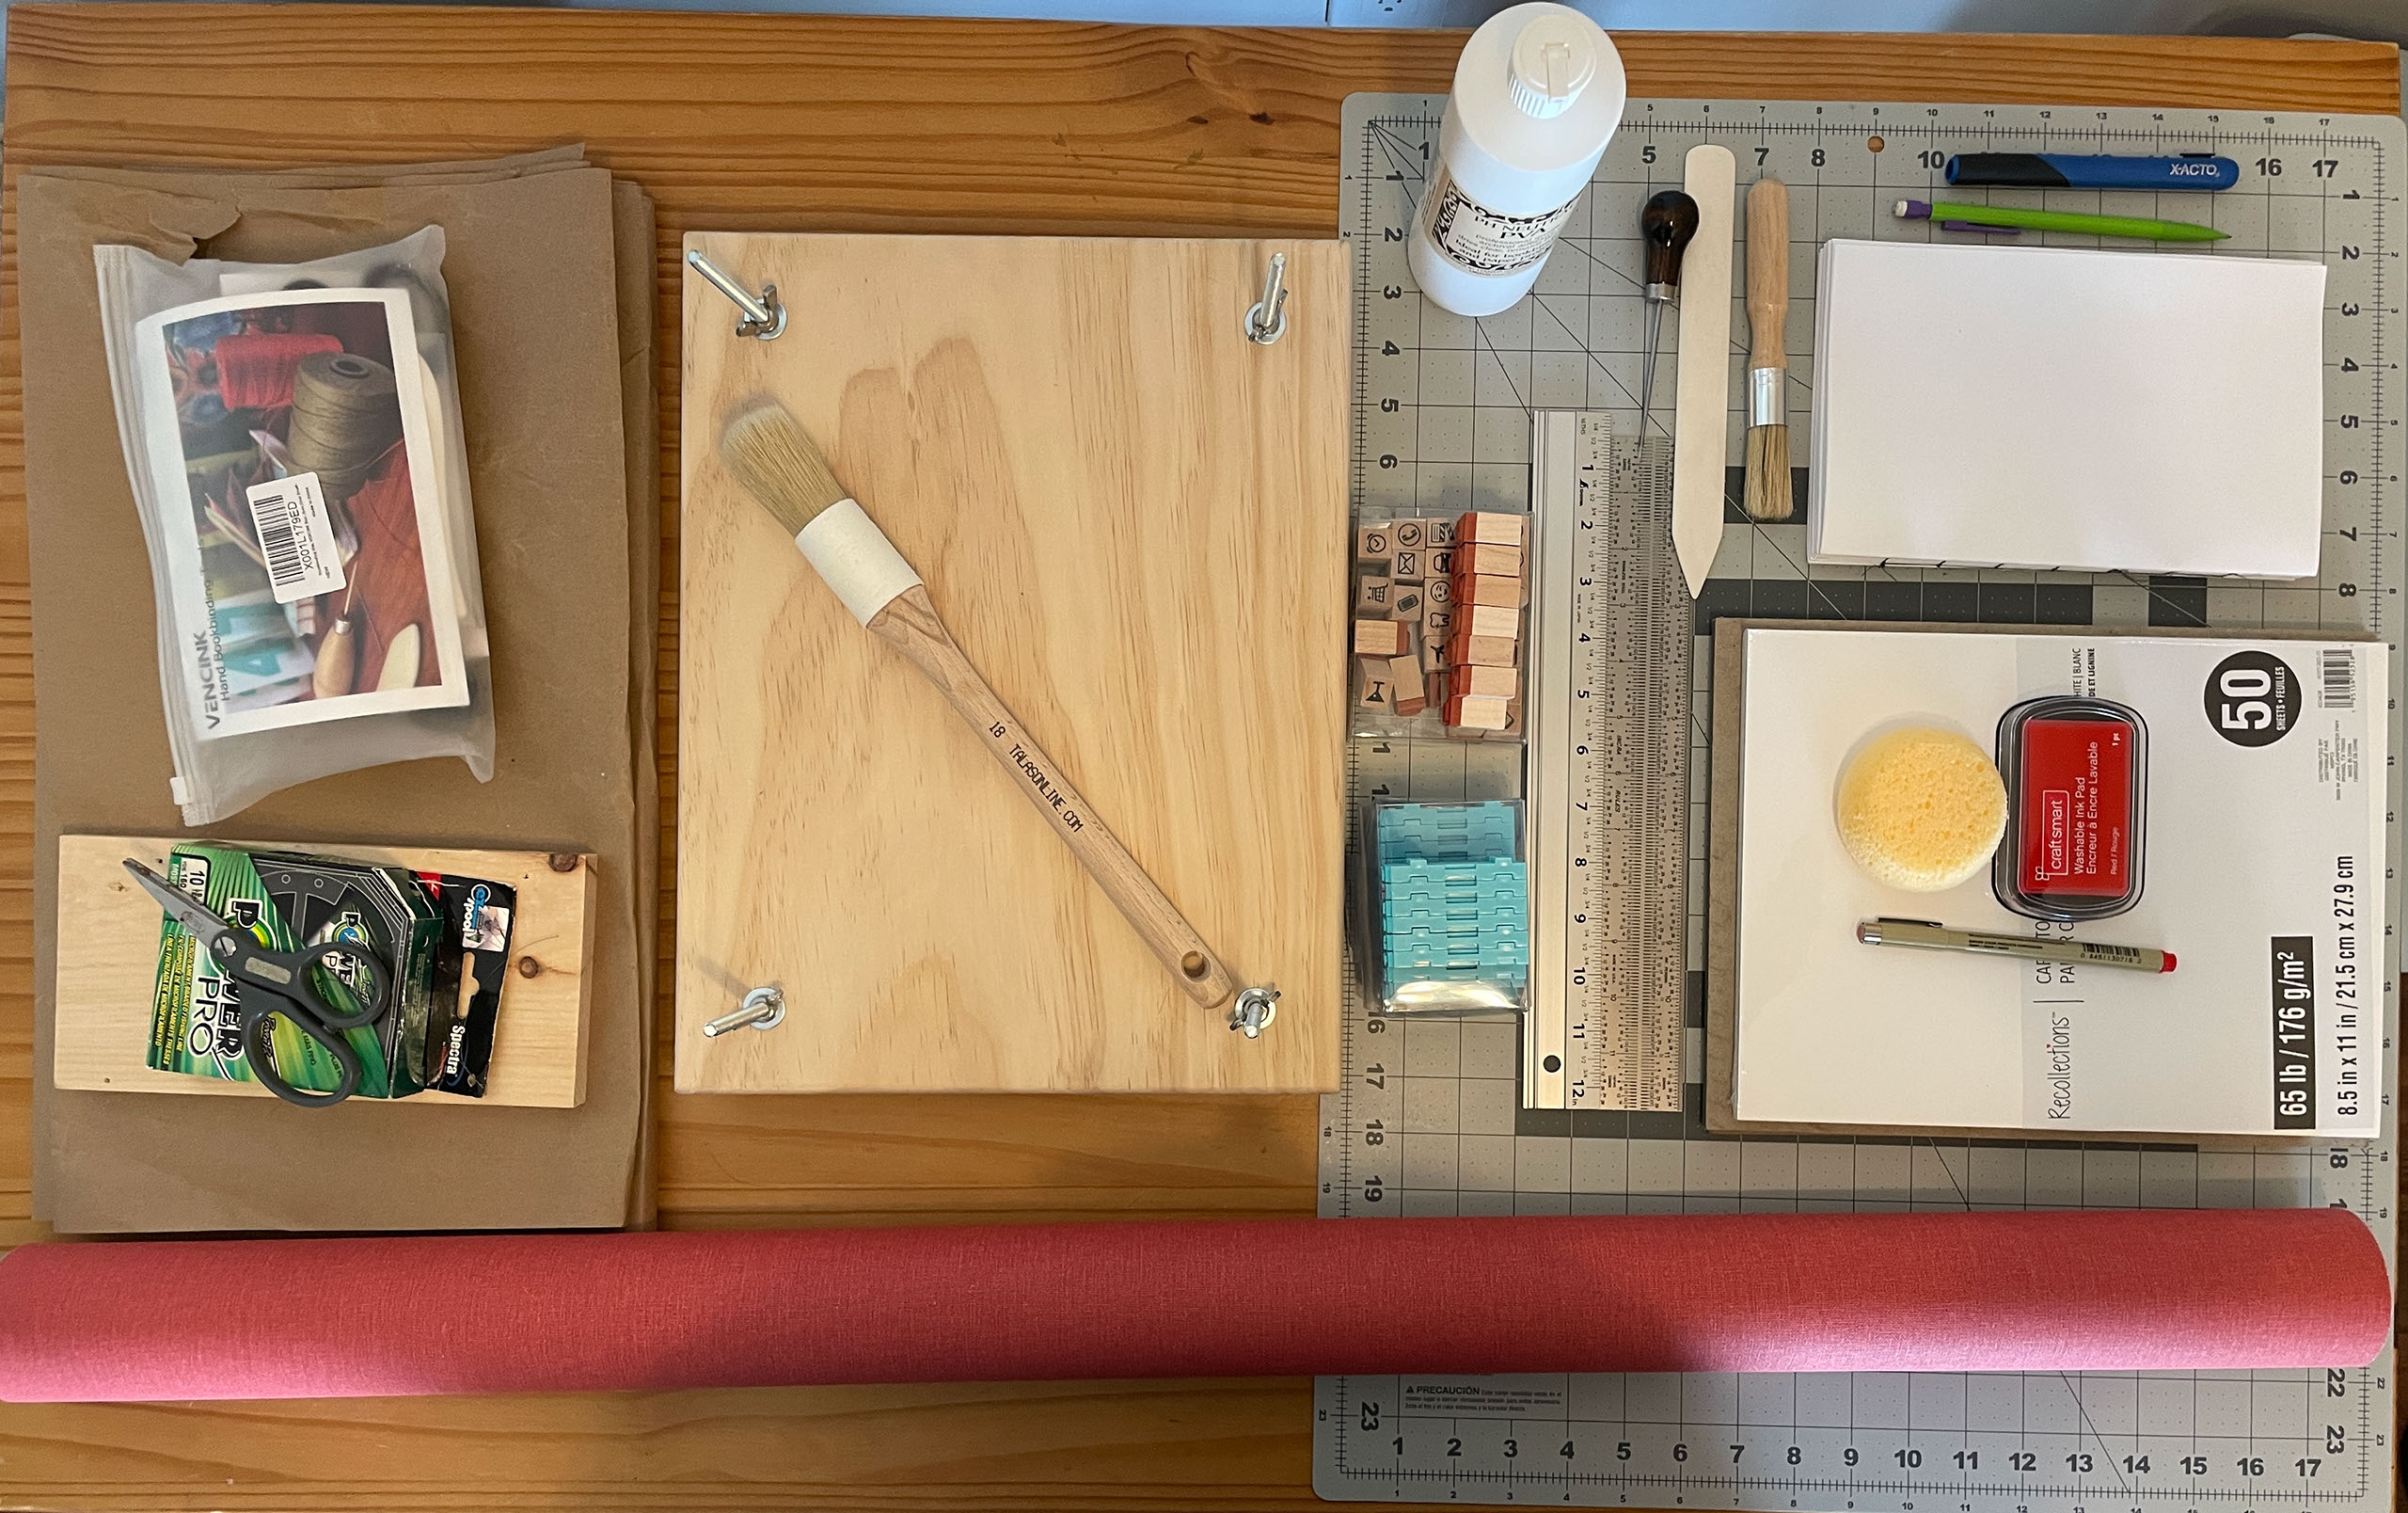 Various craft and bookbinding tools, including a book press, cutting mat, boards and buckram cloth, glue, brushes, stamps, rulers, thread, bonefolder, and awl.